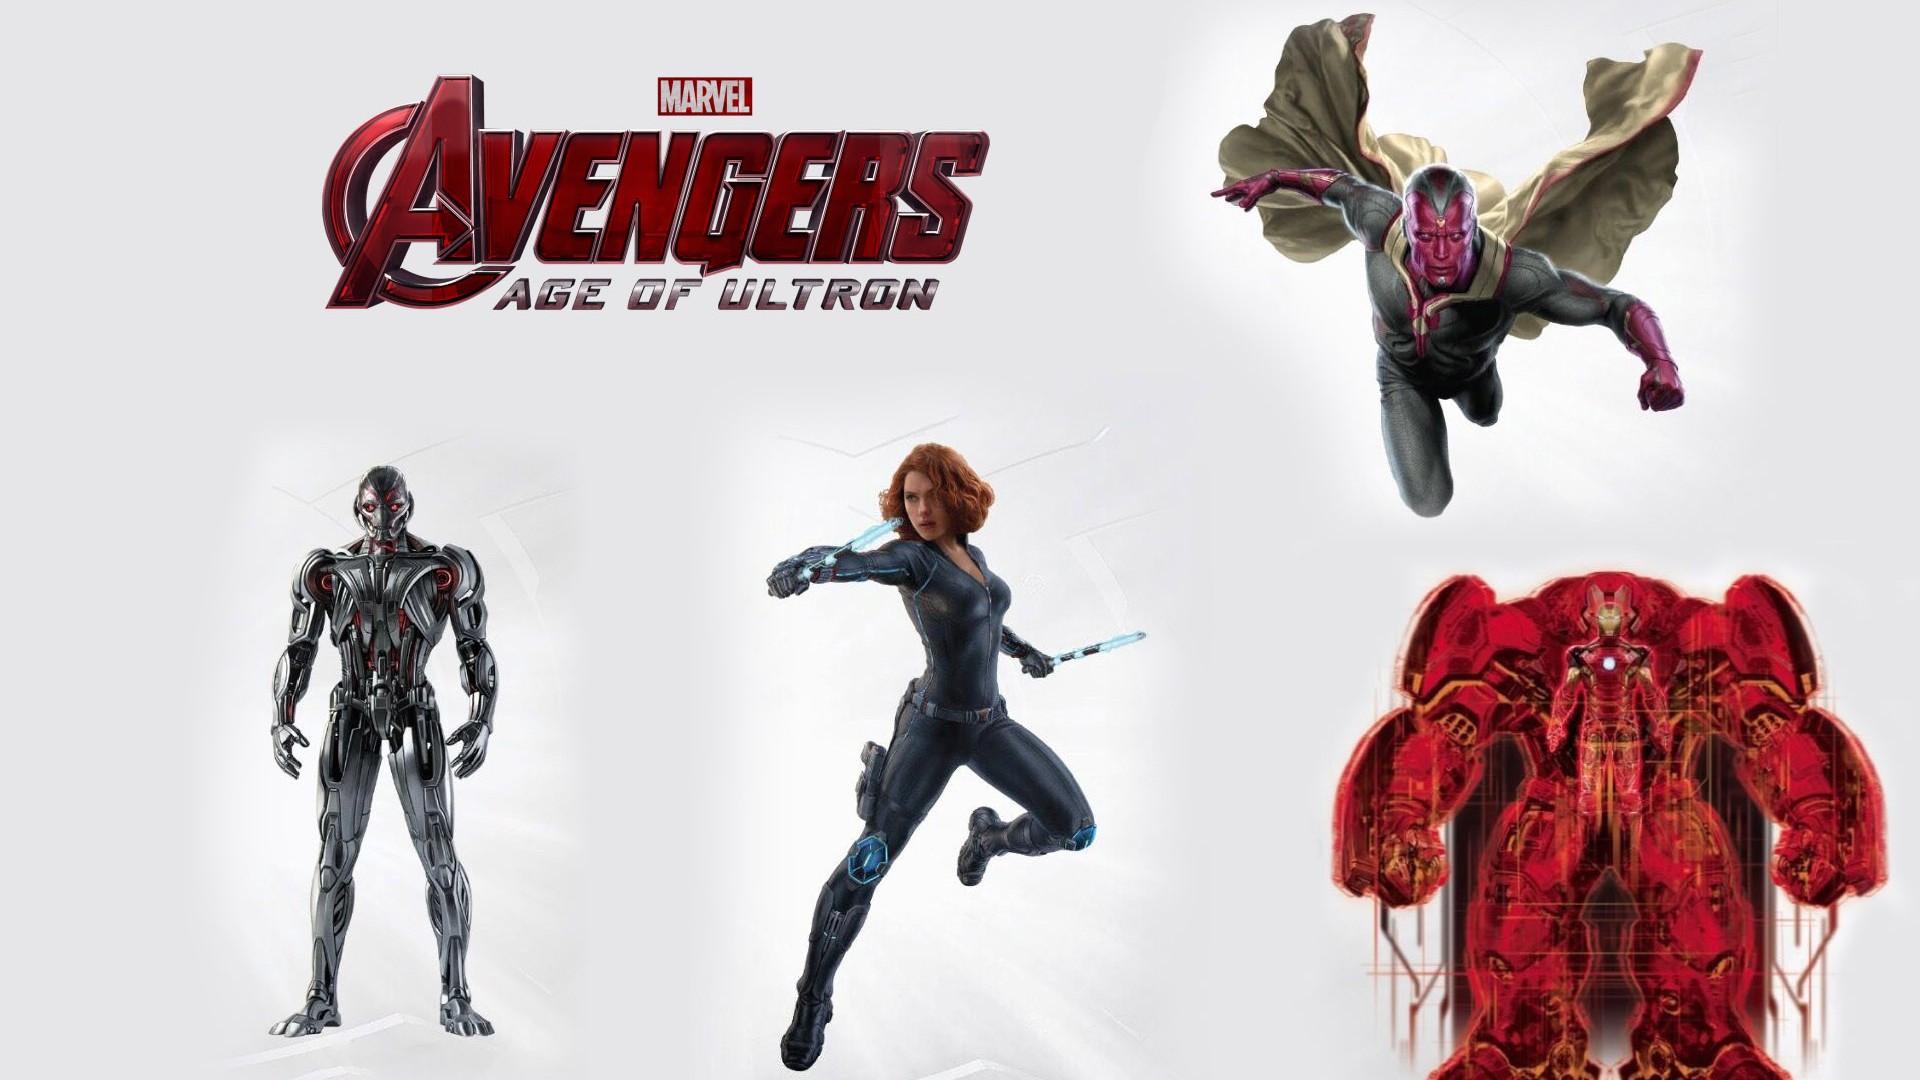 Avengers Age Of Ultron Marvel Poster HD Wallpaper Search